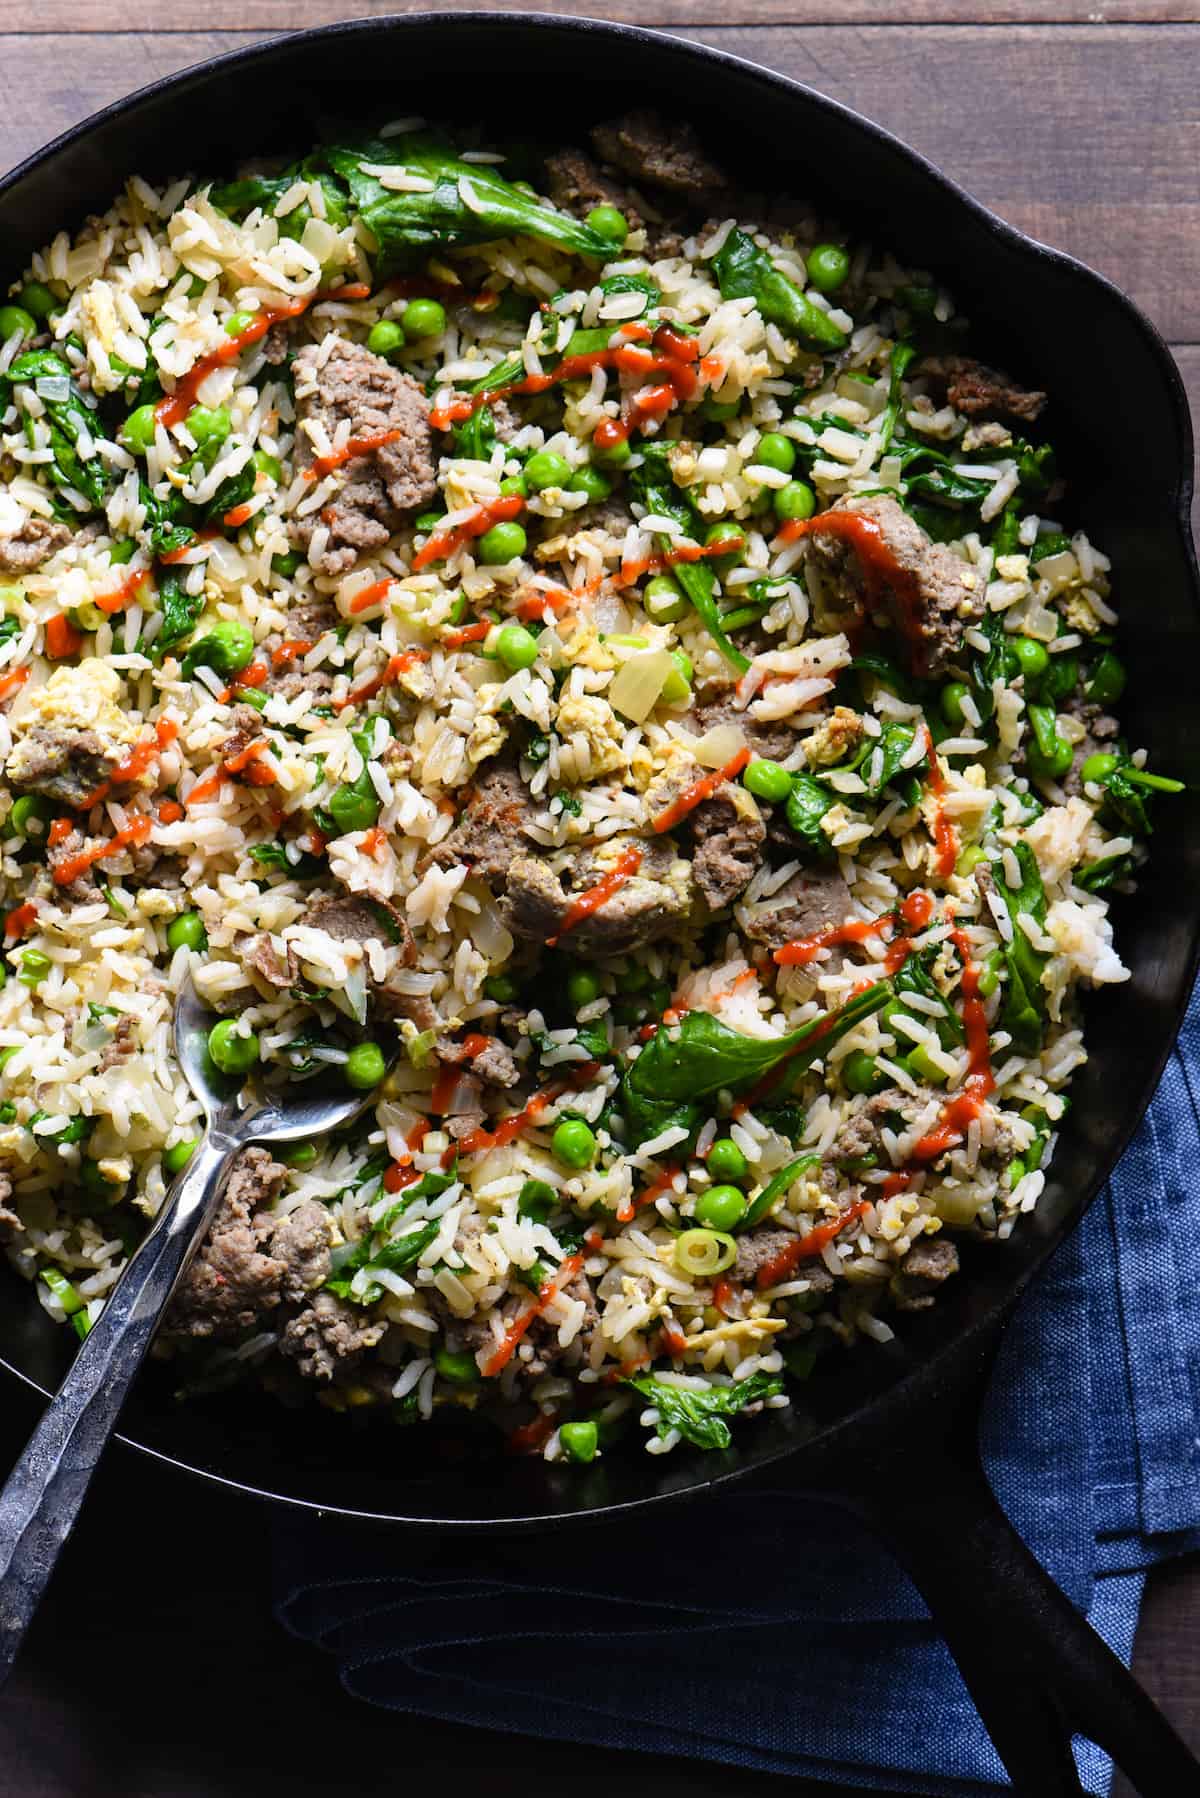 Break out a big cast iron skillet and feed a crowd with this Breakfast Fried Rice. Full of lean turkey sausage, eggs and lots of veggies, this will keep the crew fueled all morning. | foxeslovelemons.com